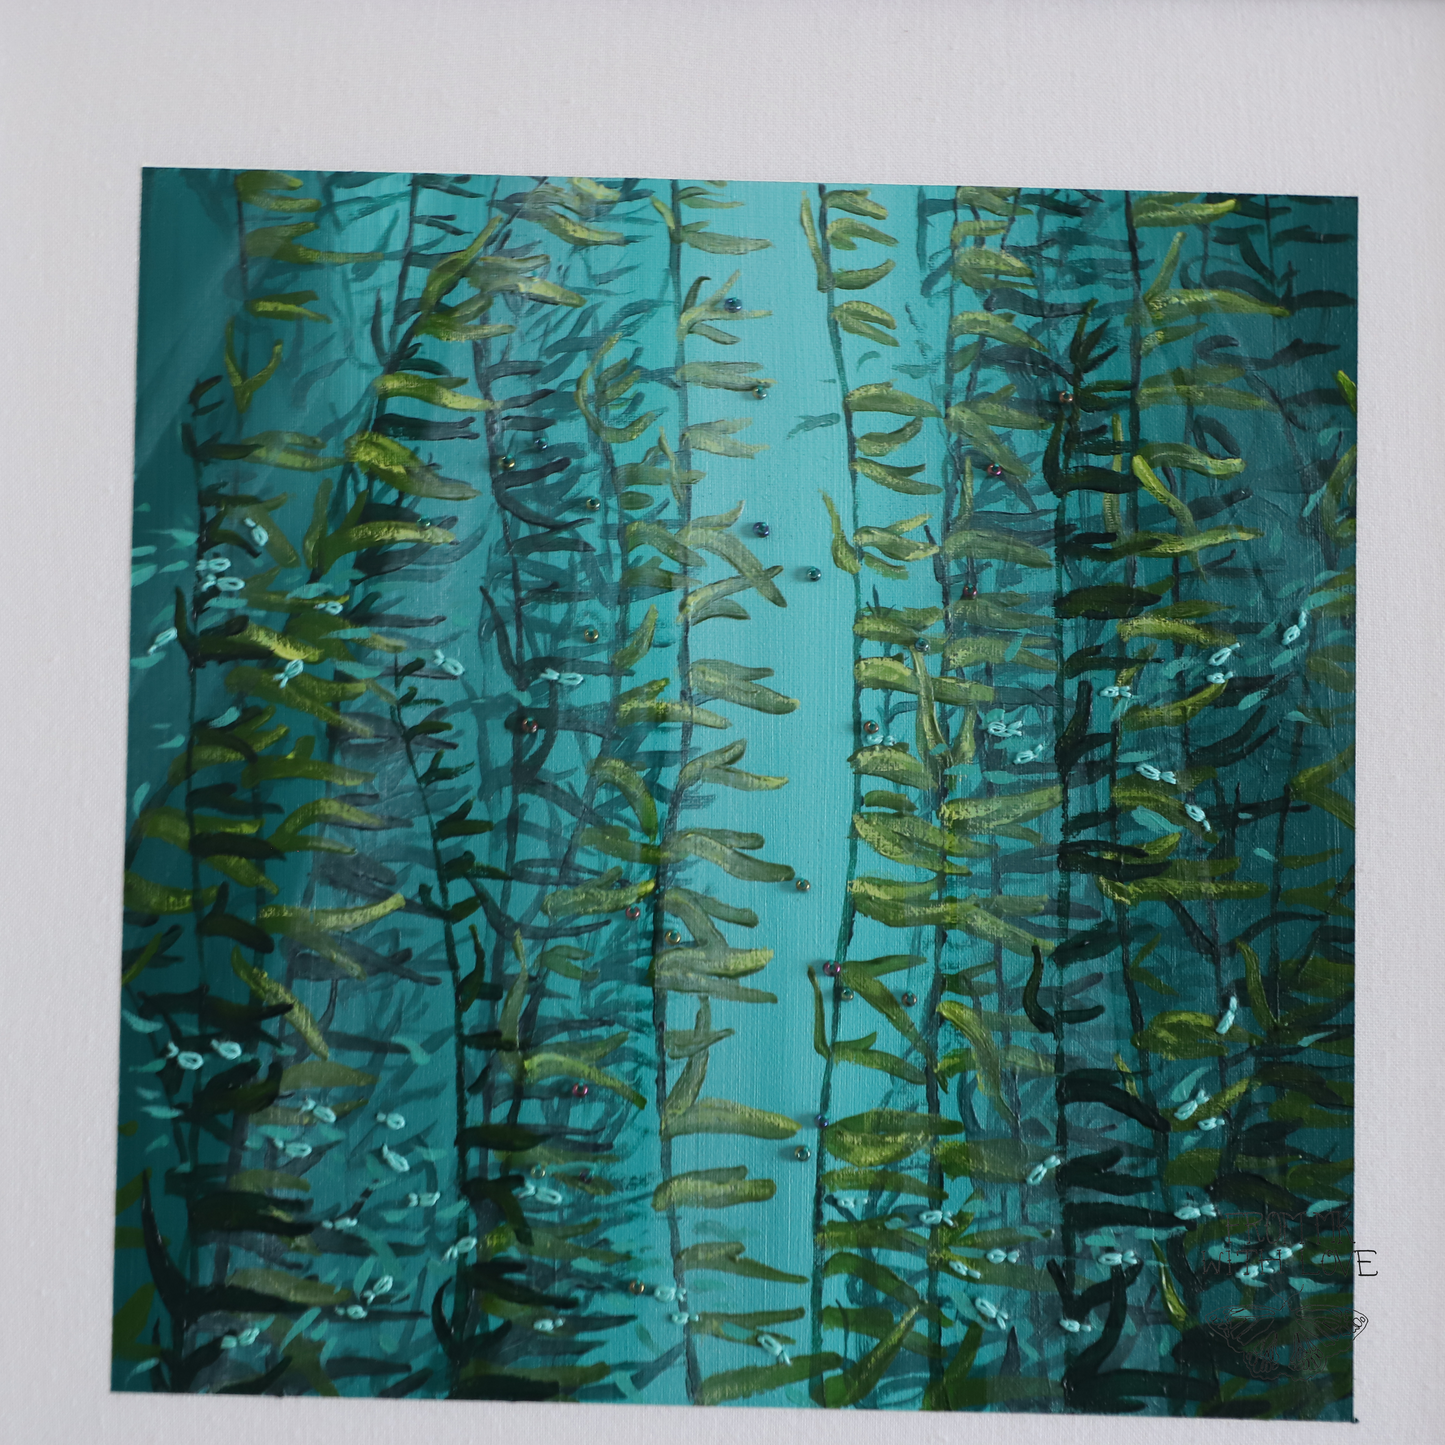 Kelp Forest Embroidery - 10"x10"